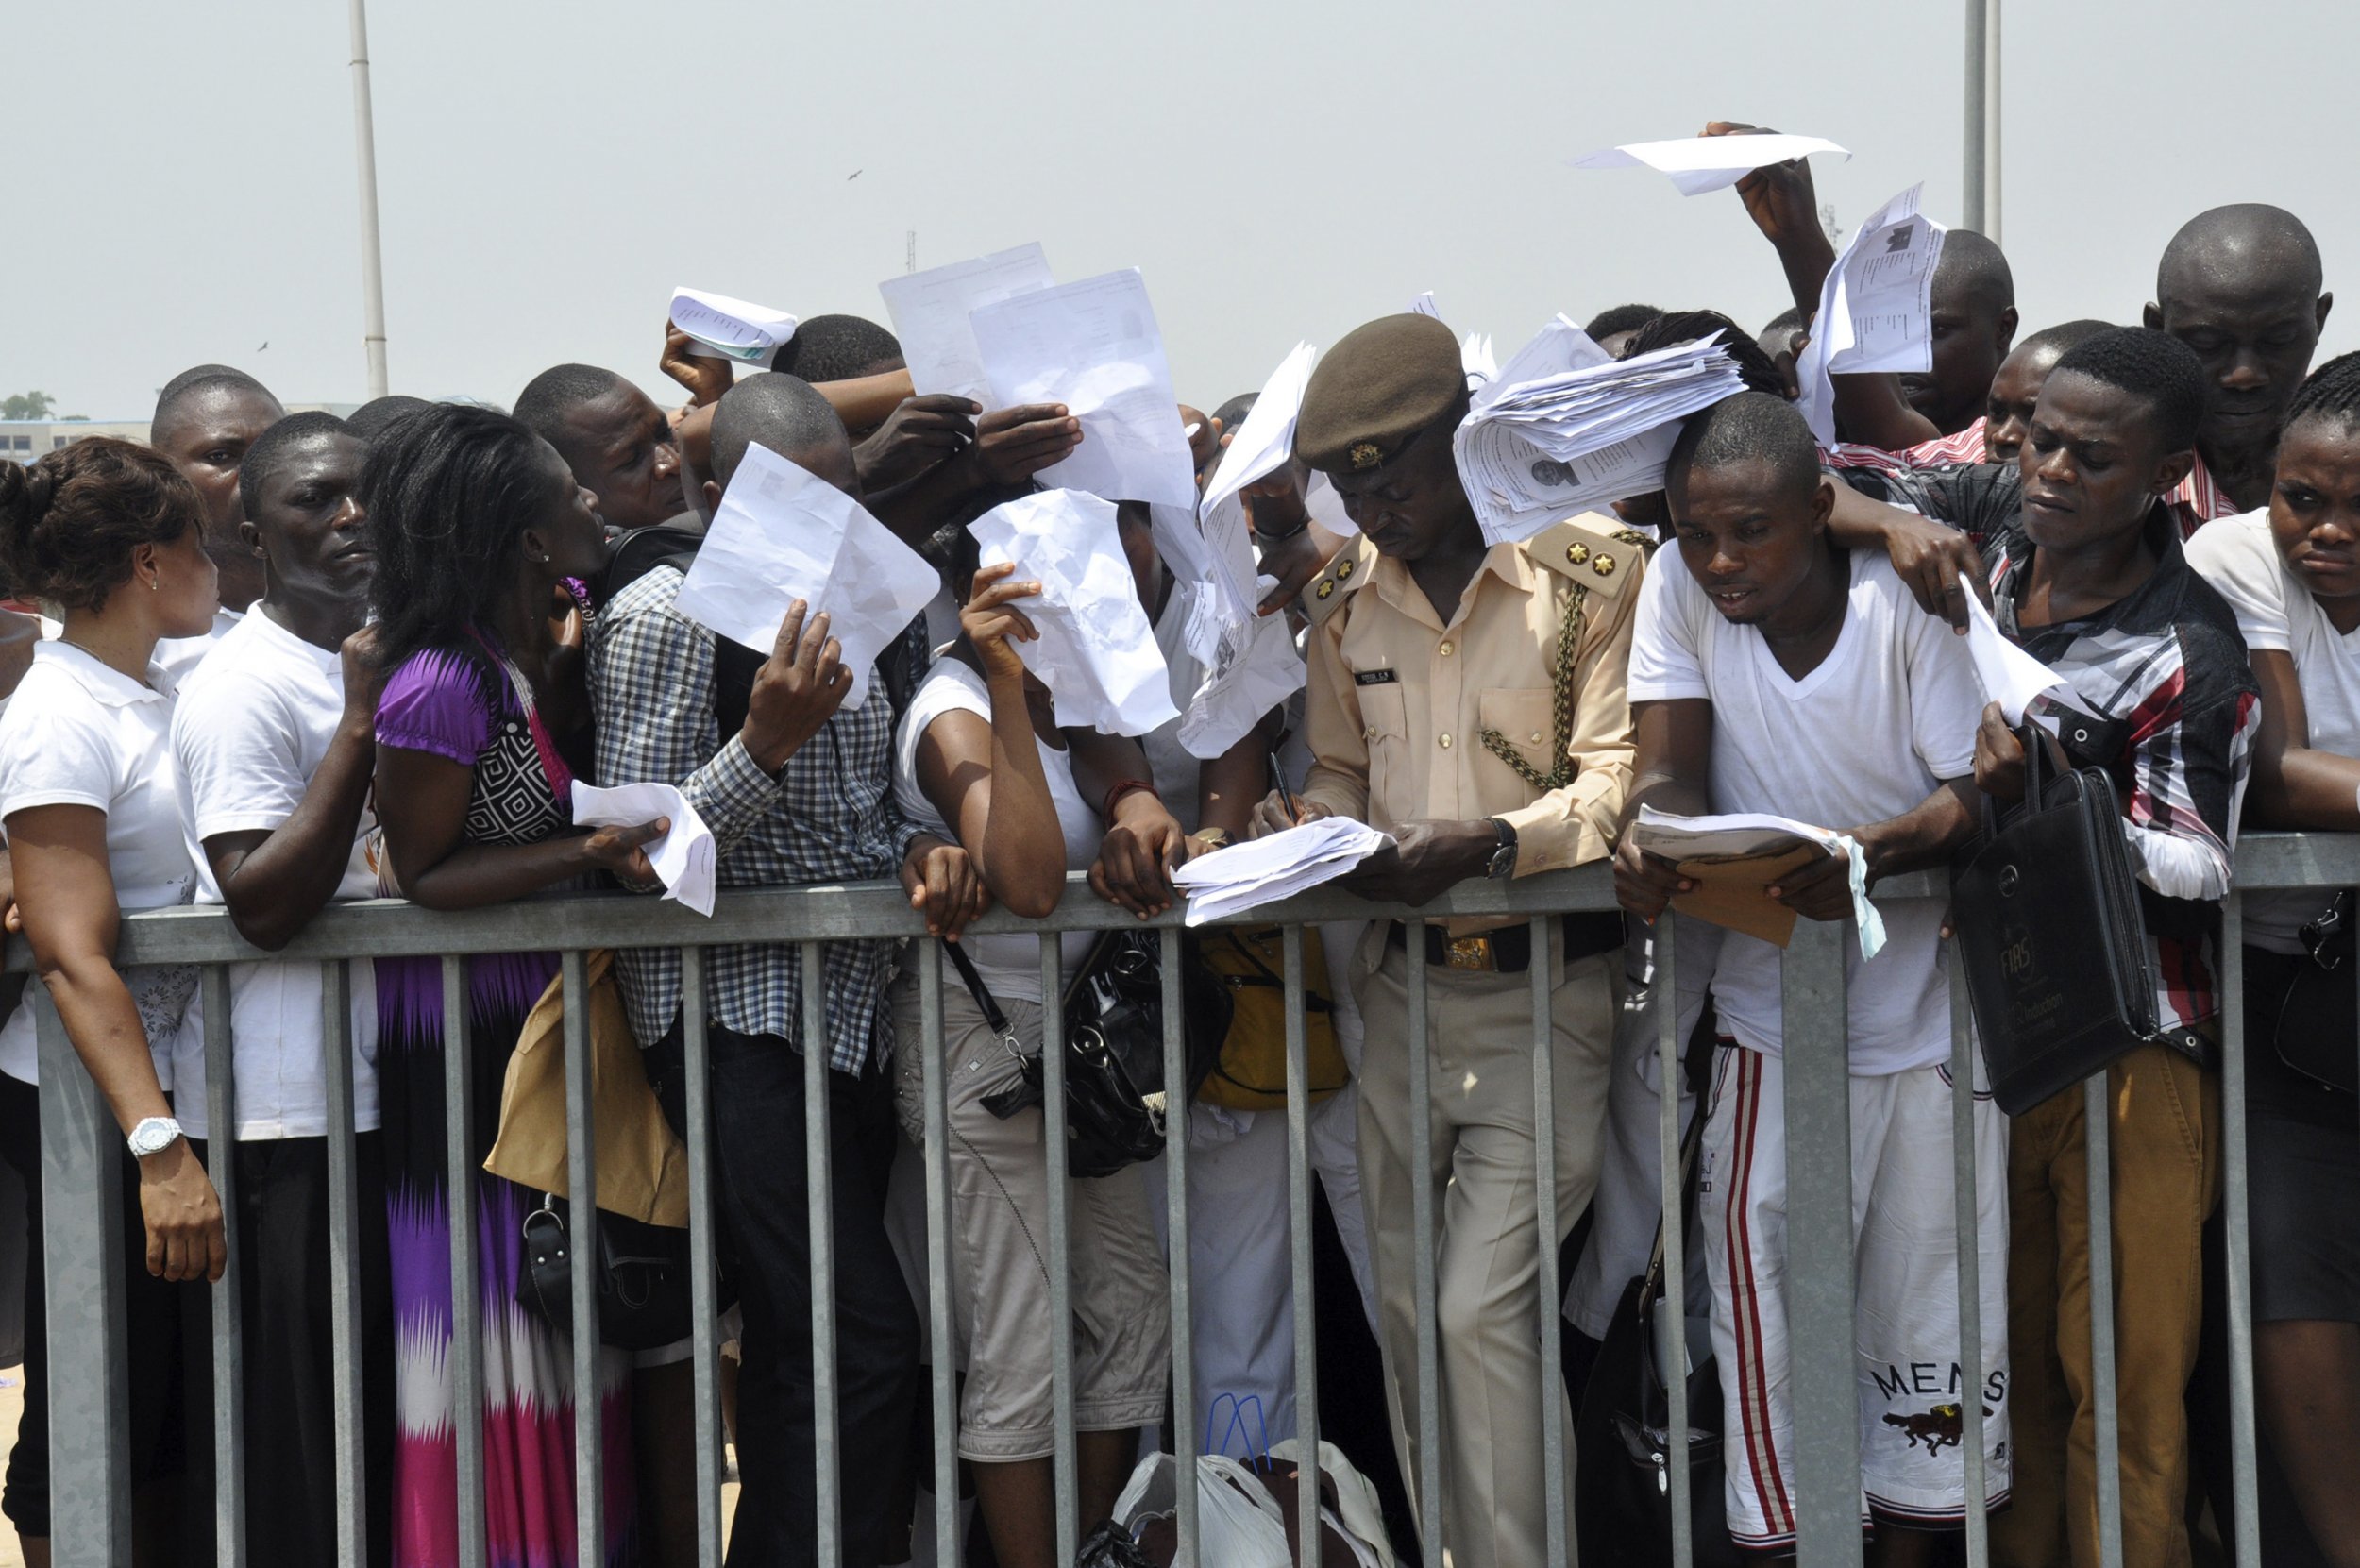 Nigerians try to submit applications at the Nigerian Immigration Service recruitment drive in Abuja.